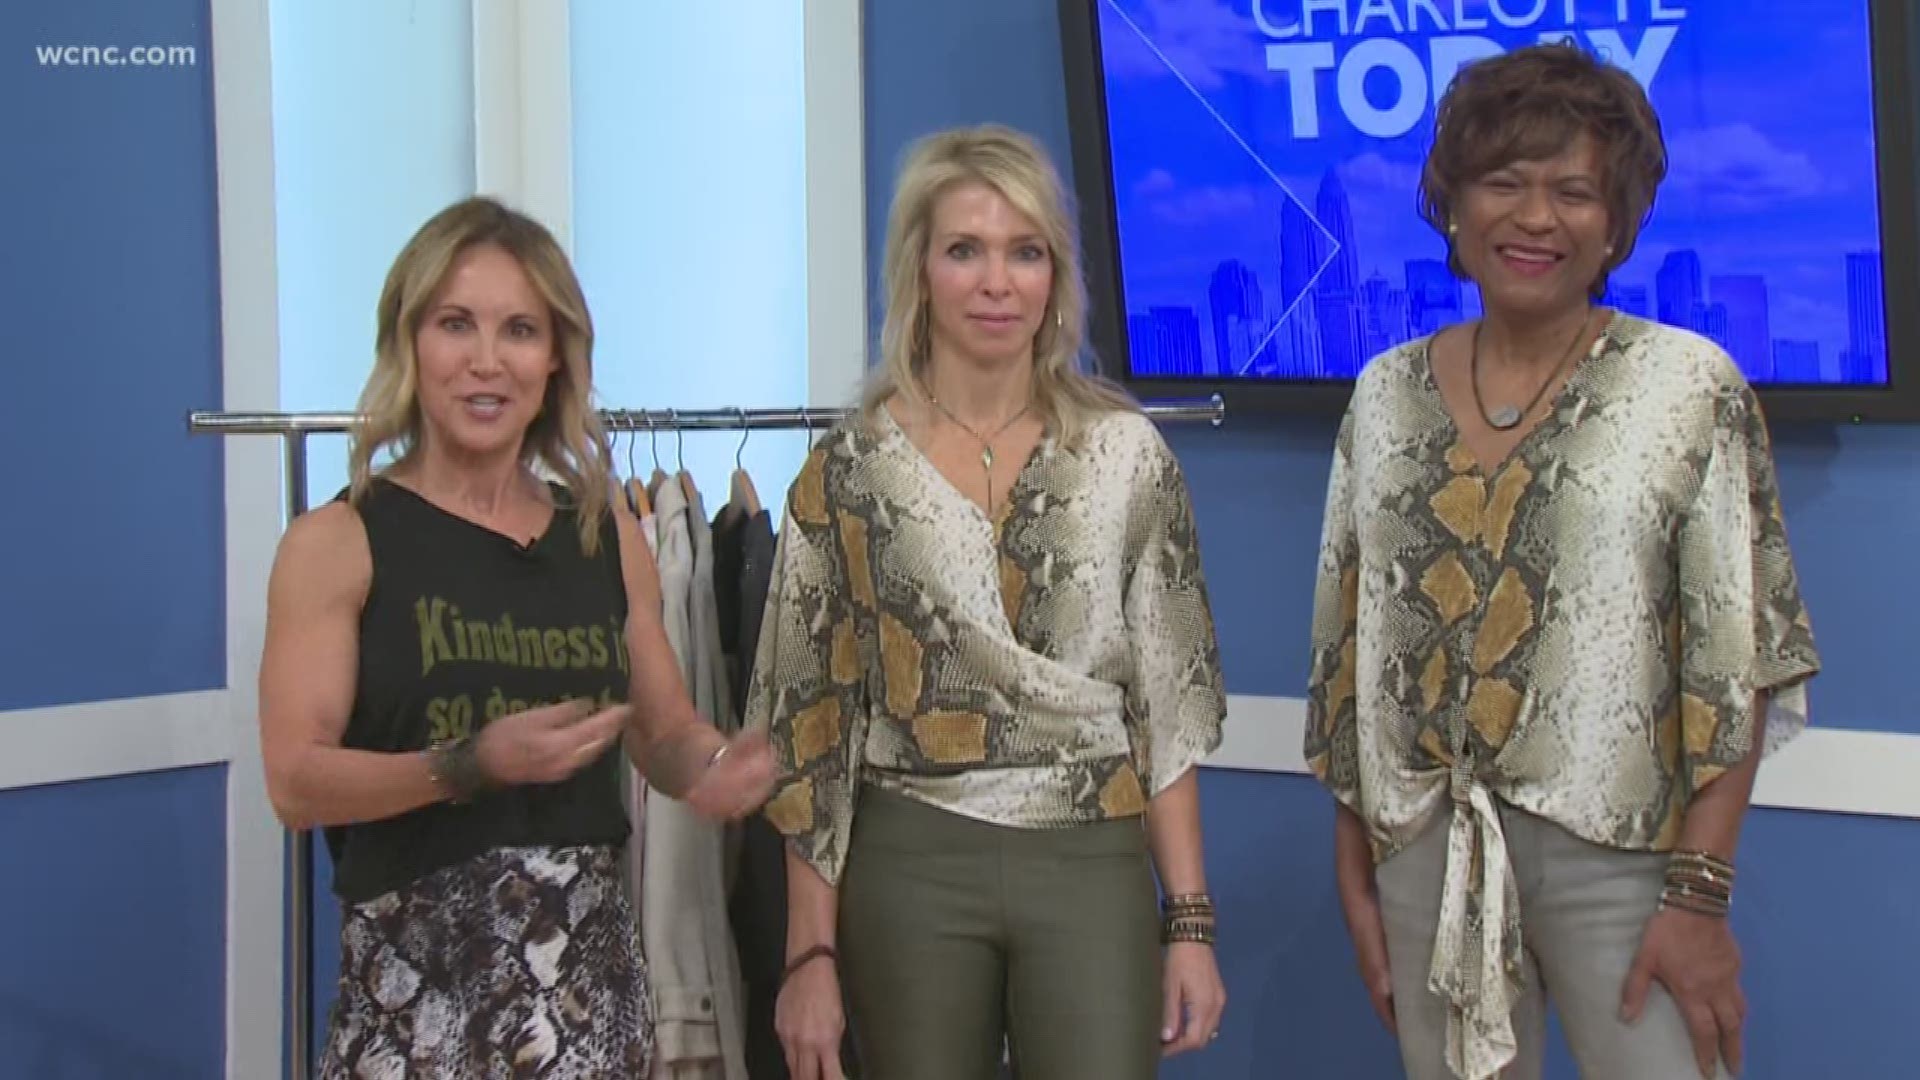 Stylist Karen Mangeney shows us how she styles the same piece of clothing on women of different ages.